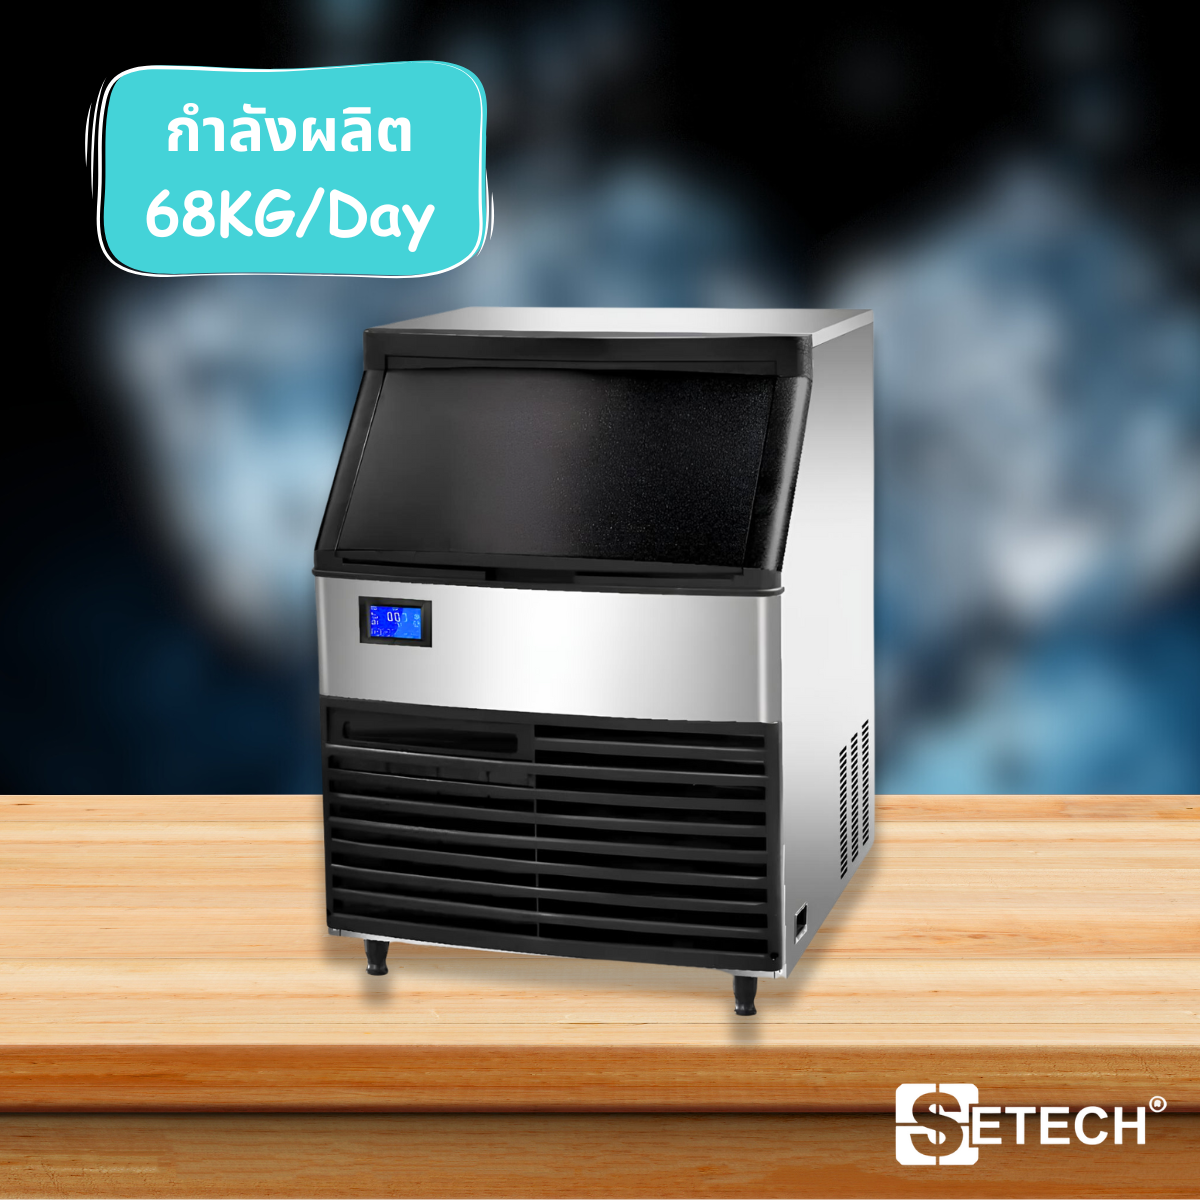 Ice maker 460w Setech production capacity 68KG per day